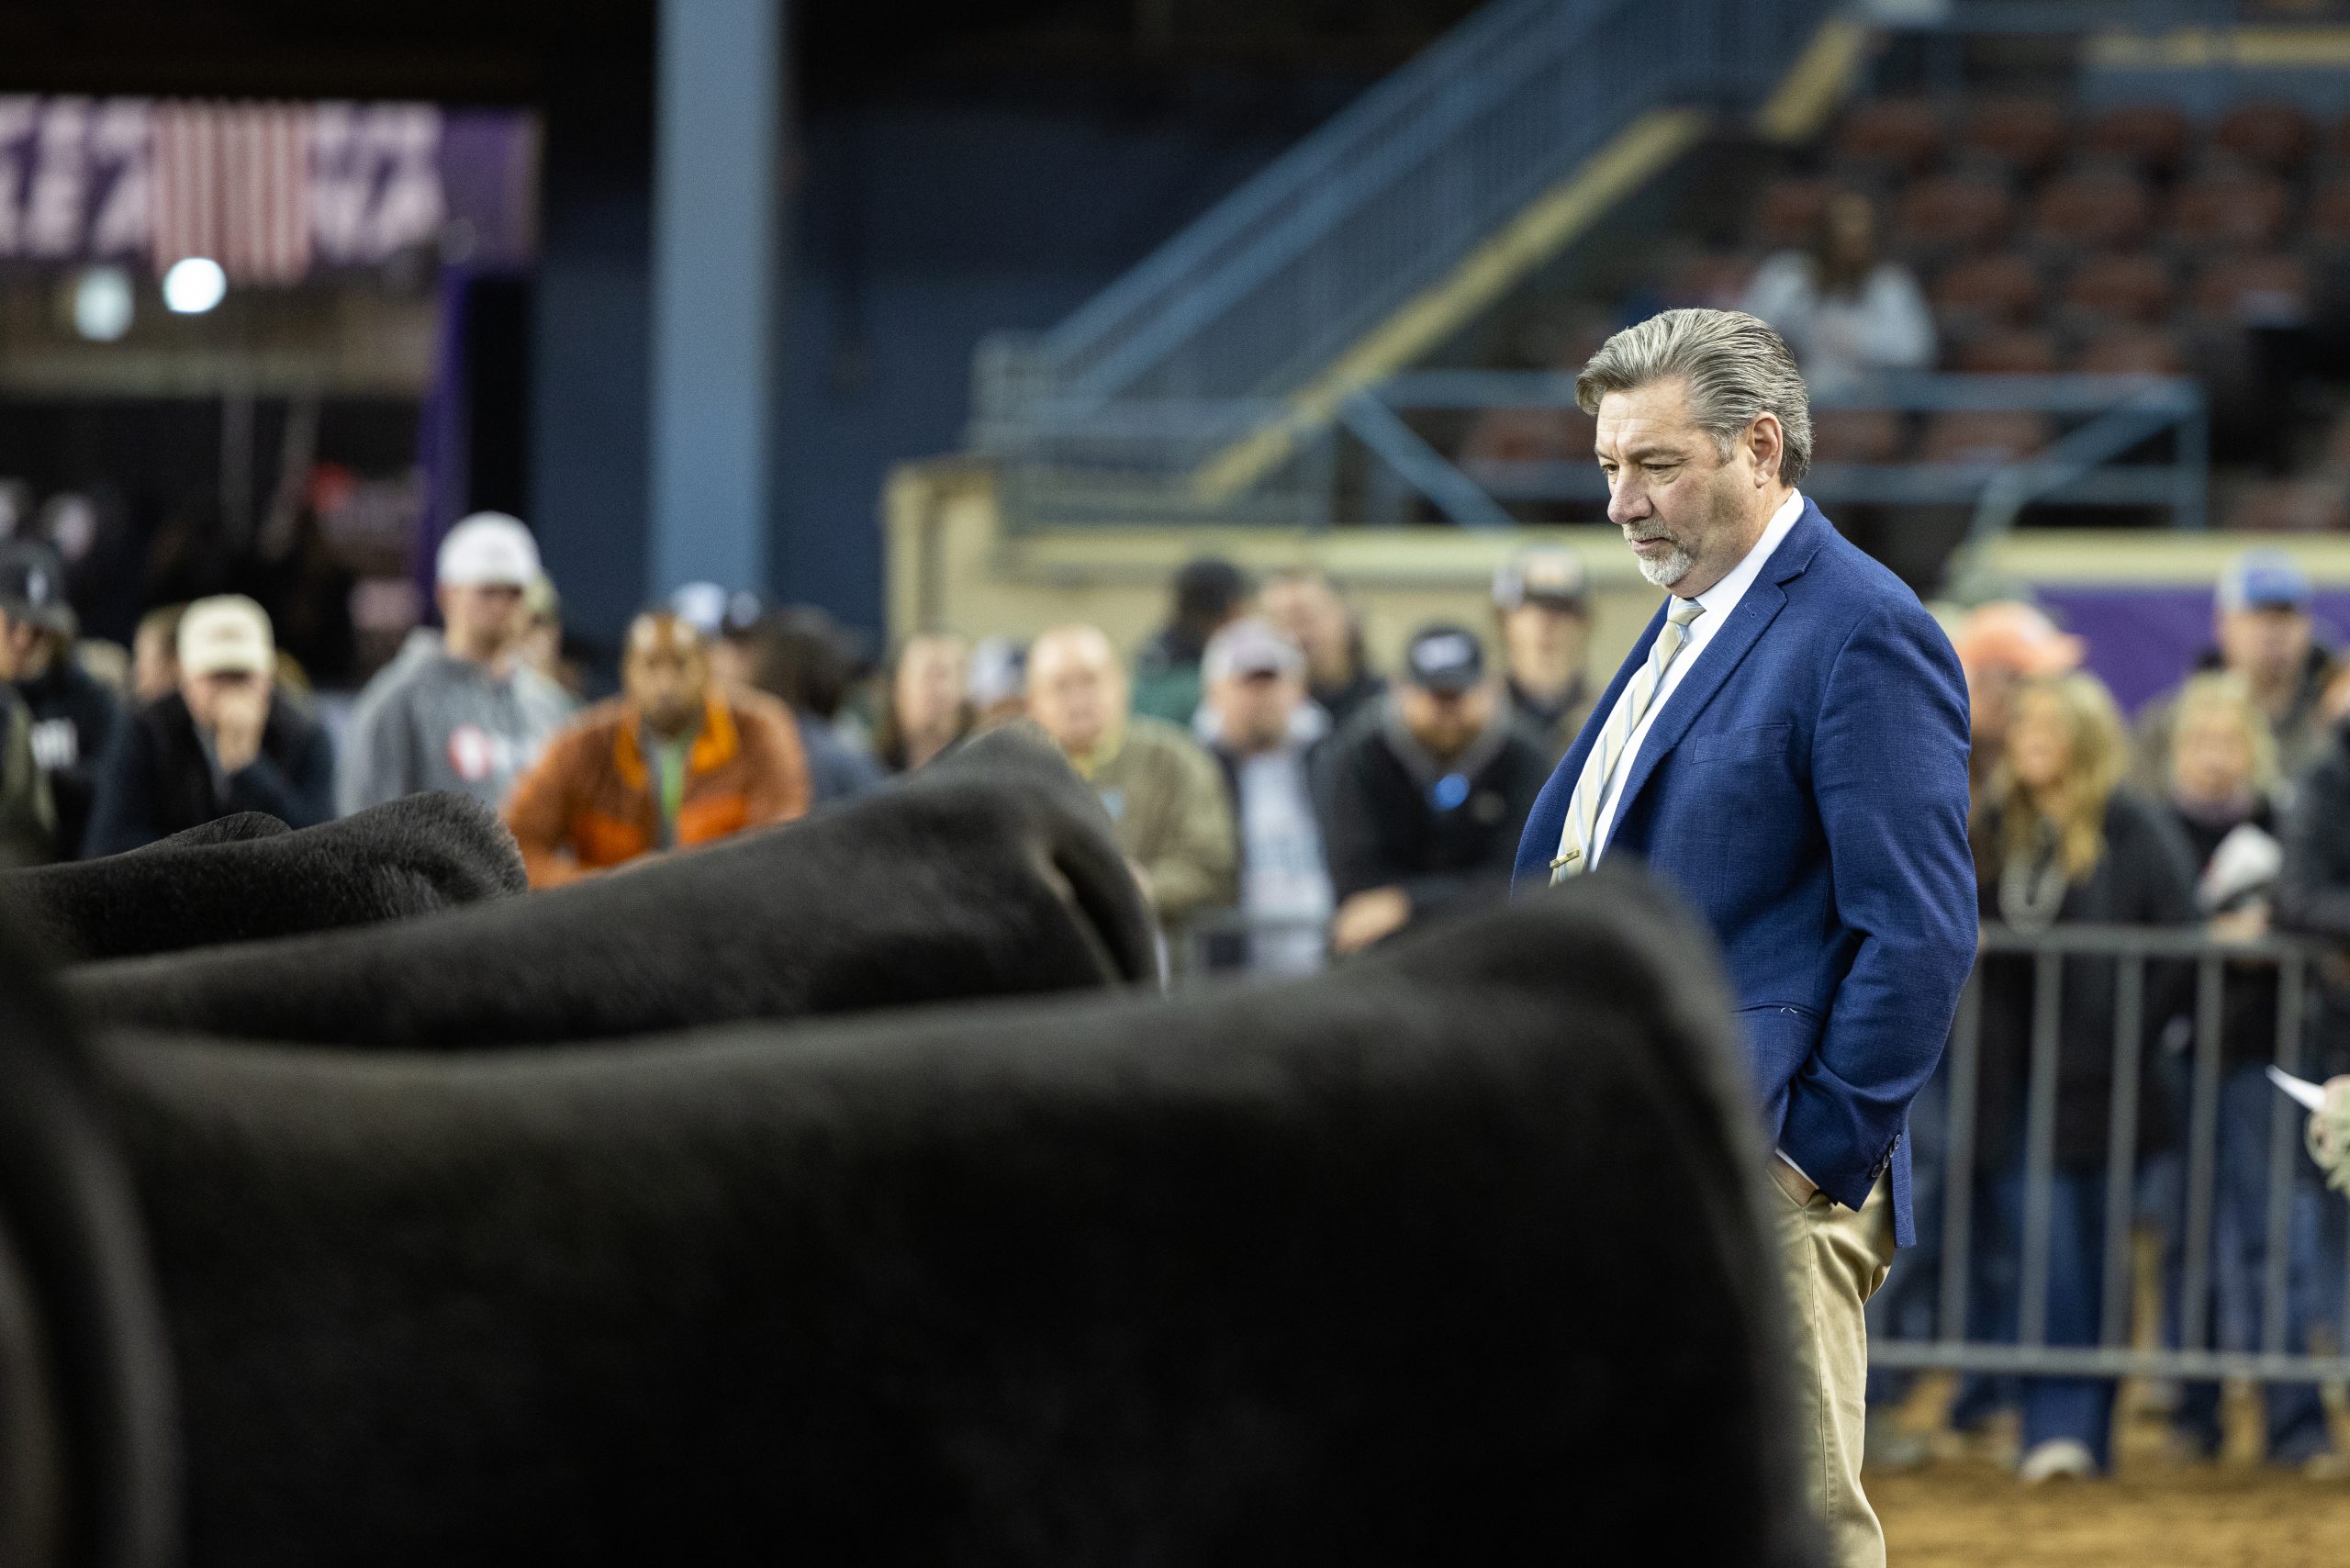 The judge examines the livestock in a class at Cattlemen's Congress. (Photo courtesy Next Level Images.)